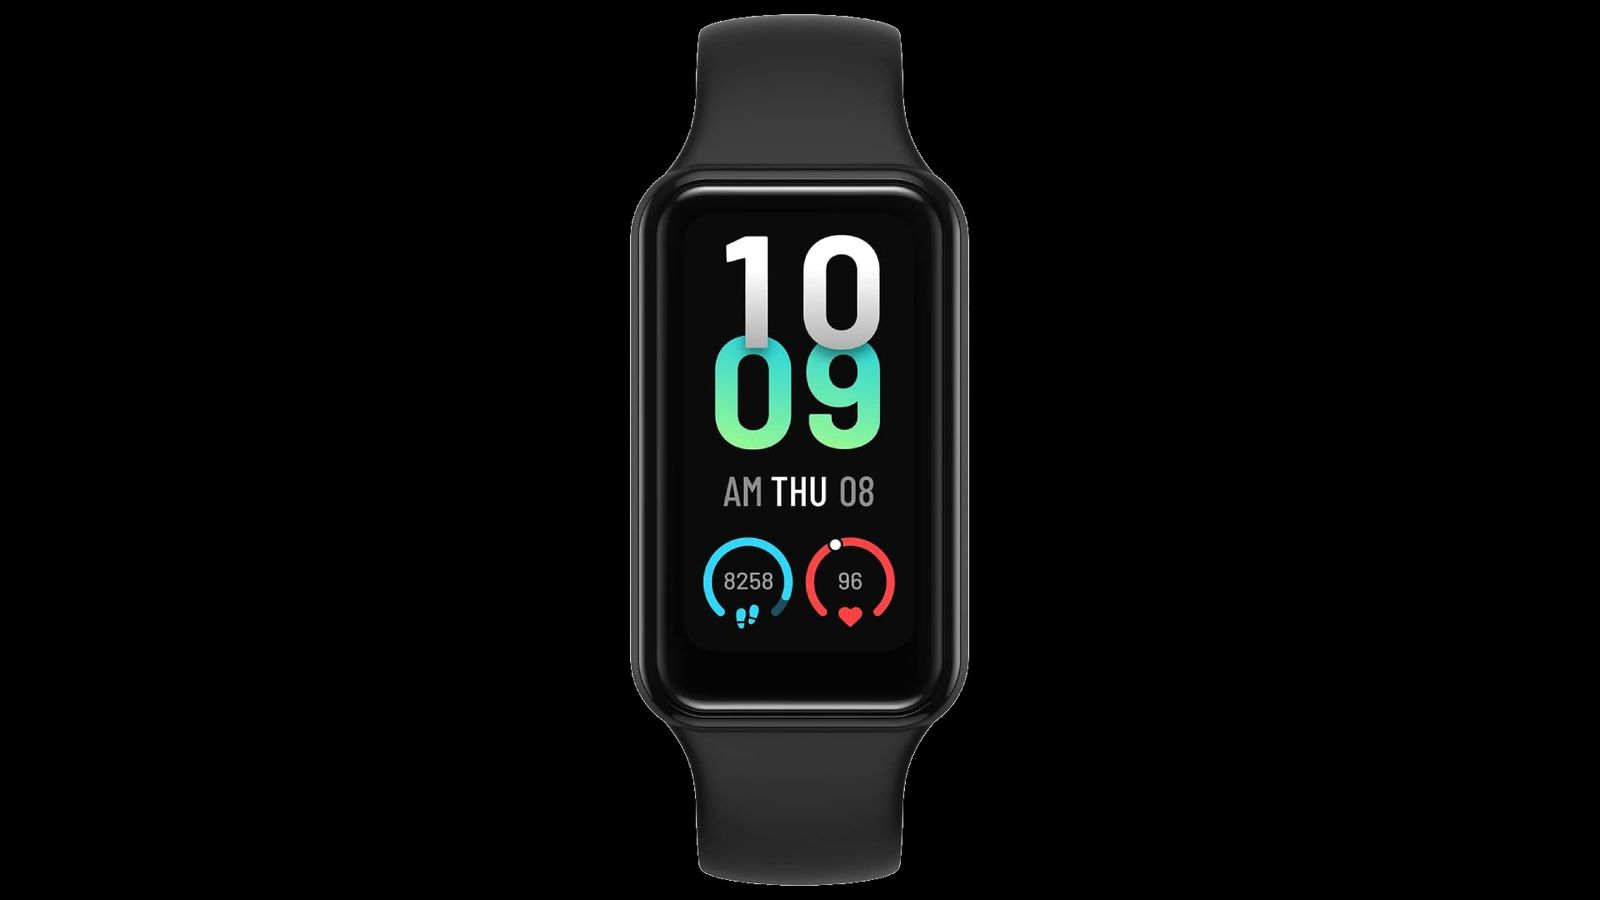 Amazfit Band 7 product image of a black smartwatch with the time 10:09 in white and blue and green on the display.